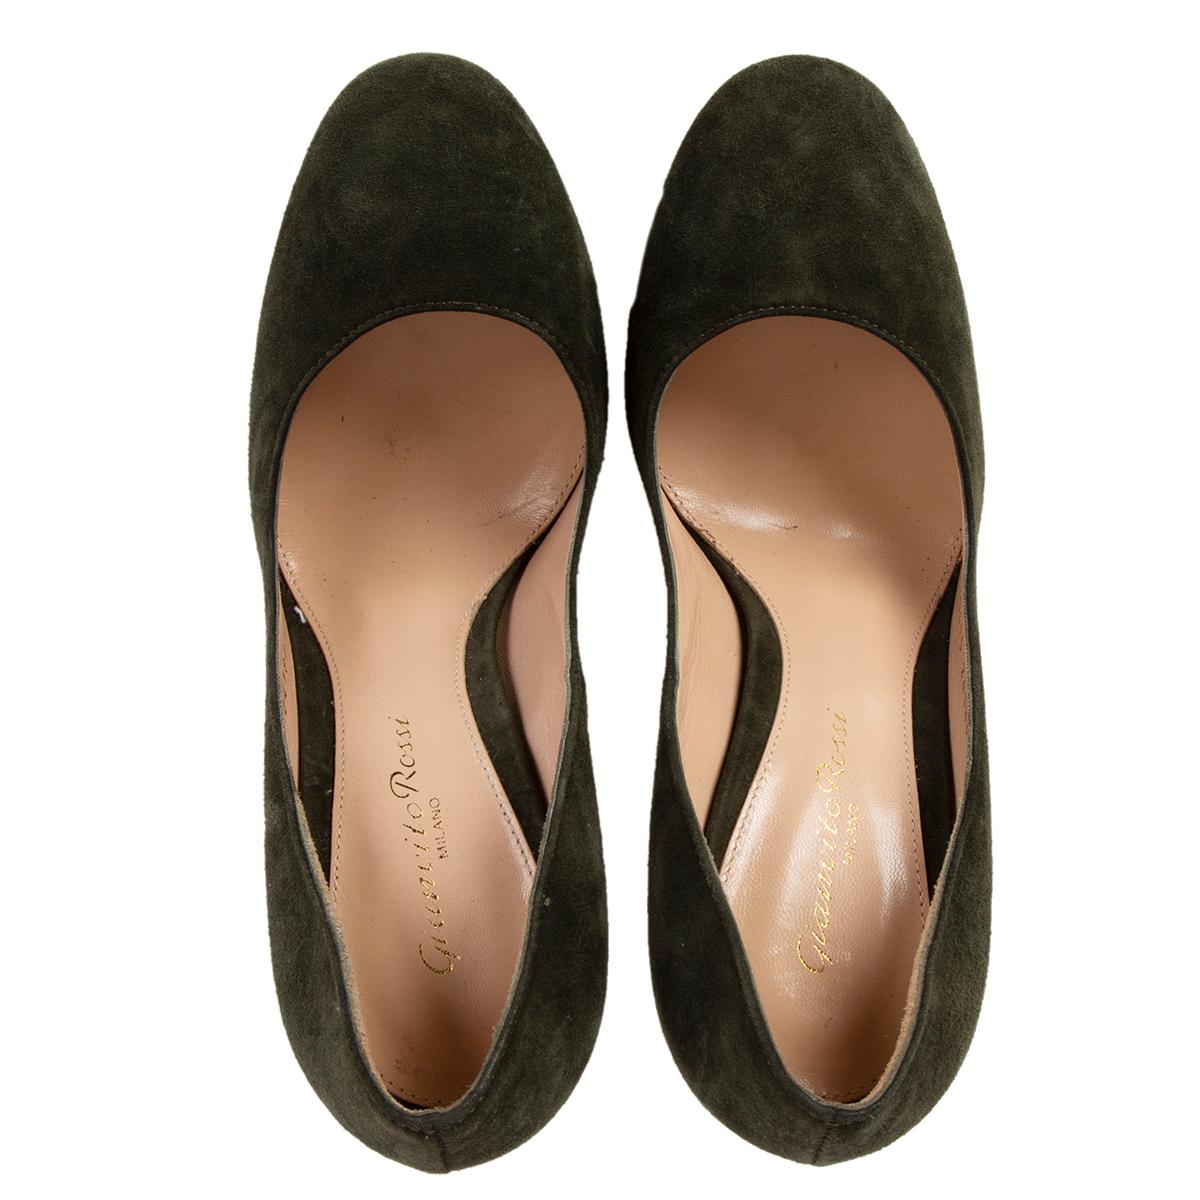 Black GIANVITO ROSSI green suede FLORENCE Pumps Shoes 36 For Sale